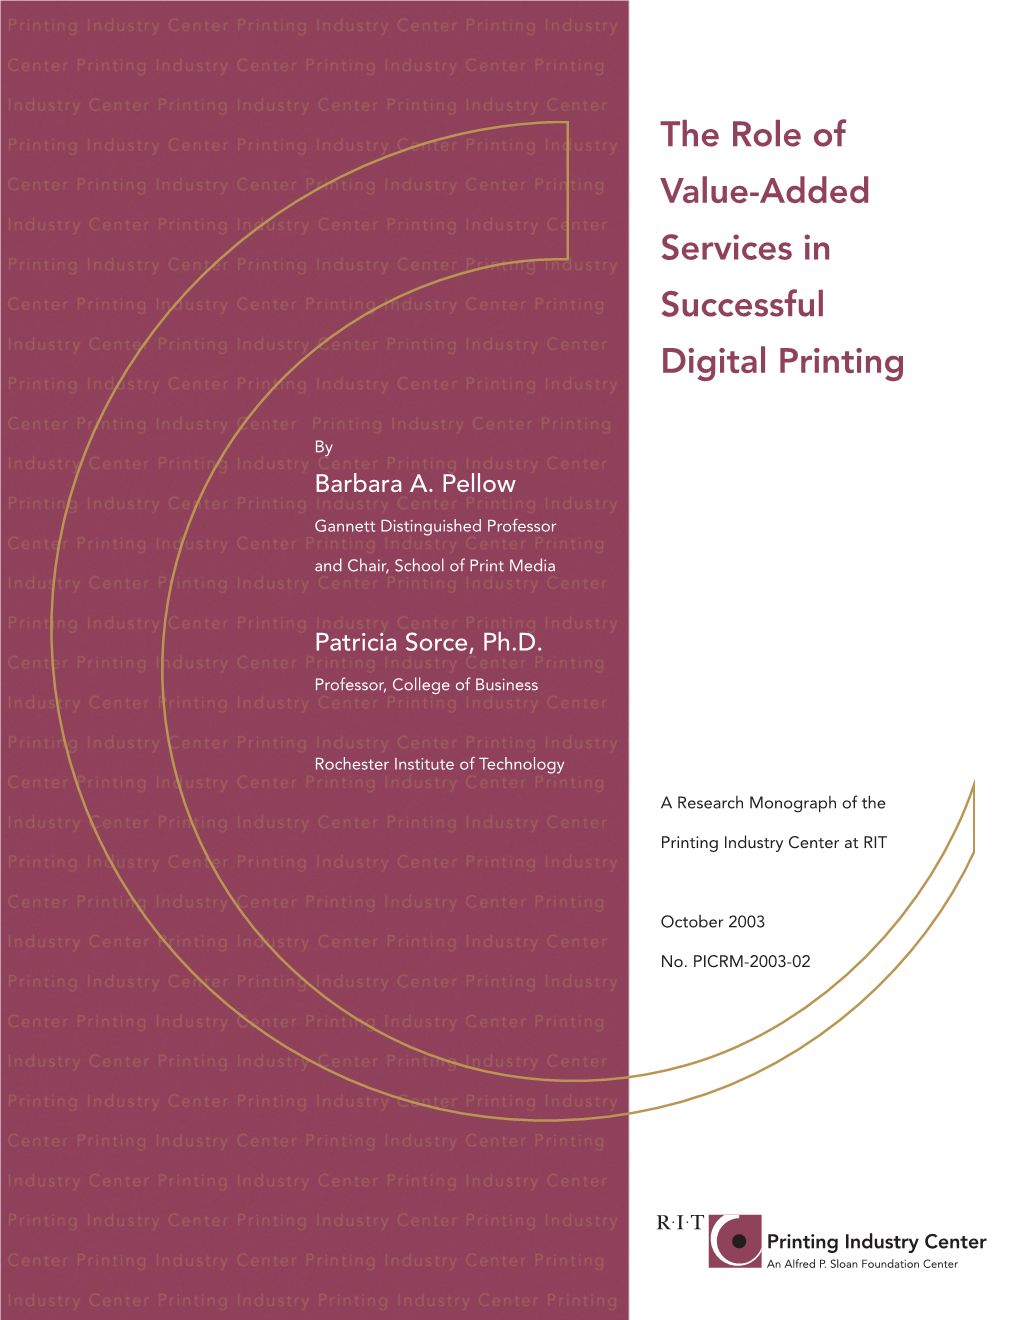 The Role of Value-Added Services in Successful Digital Printing